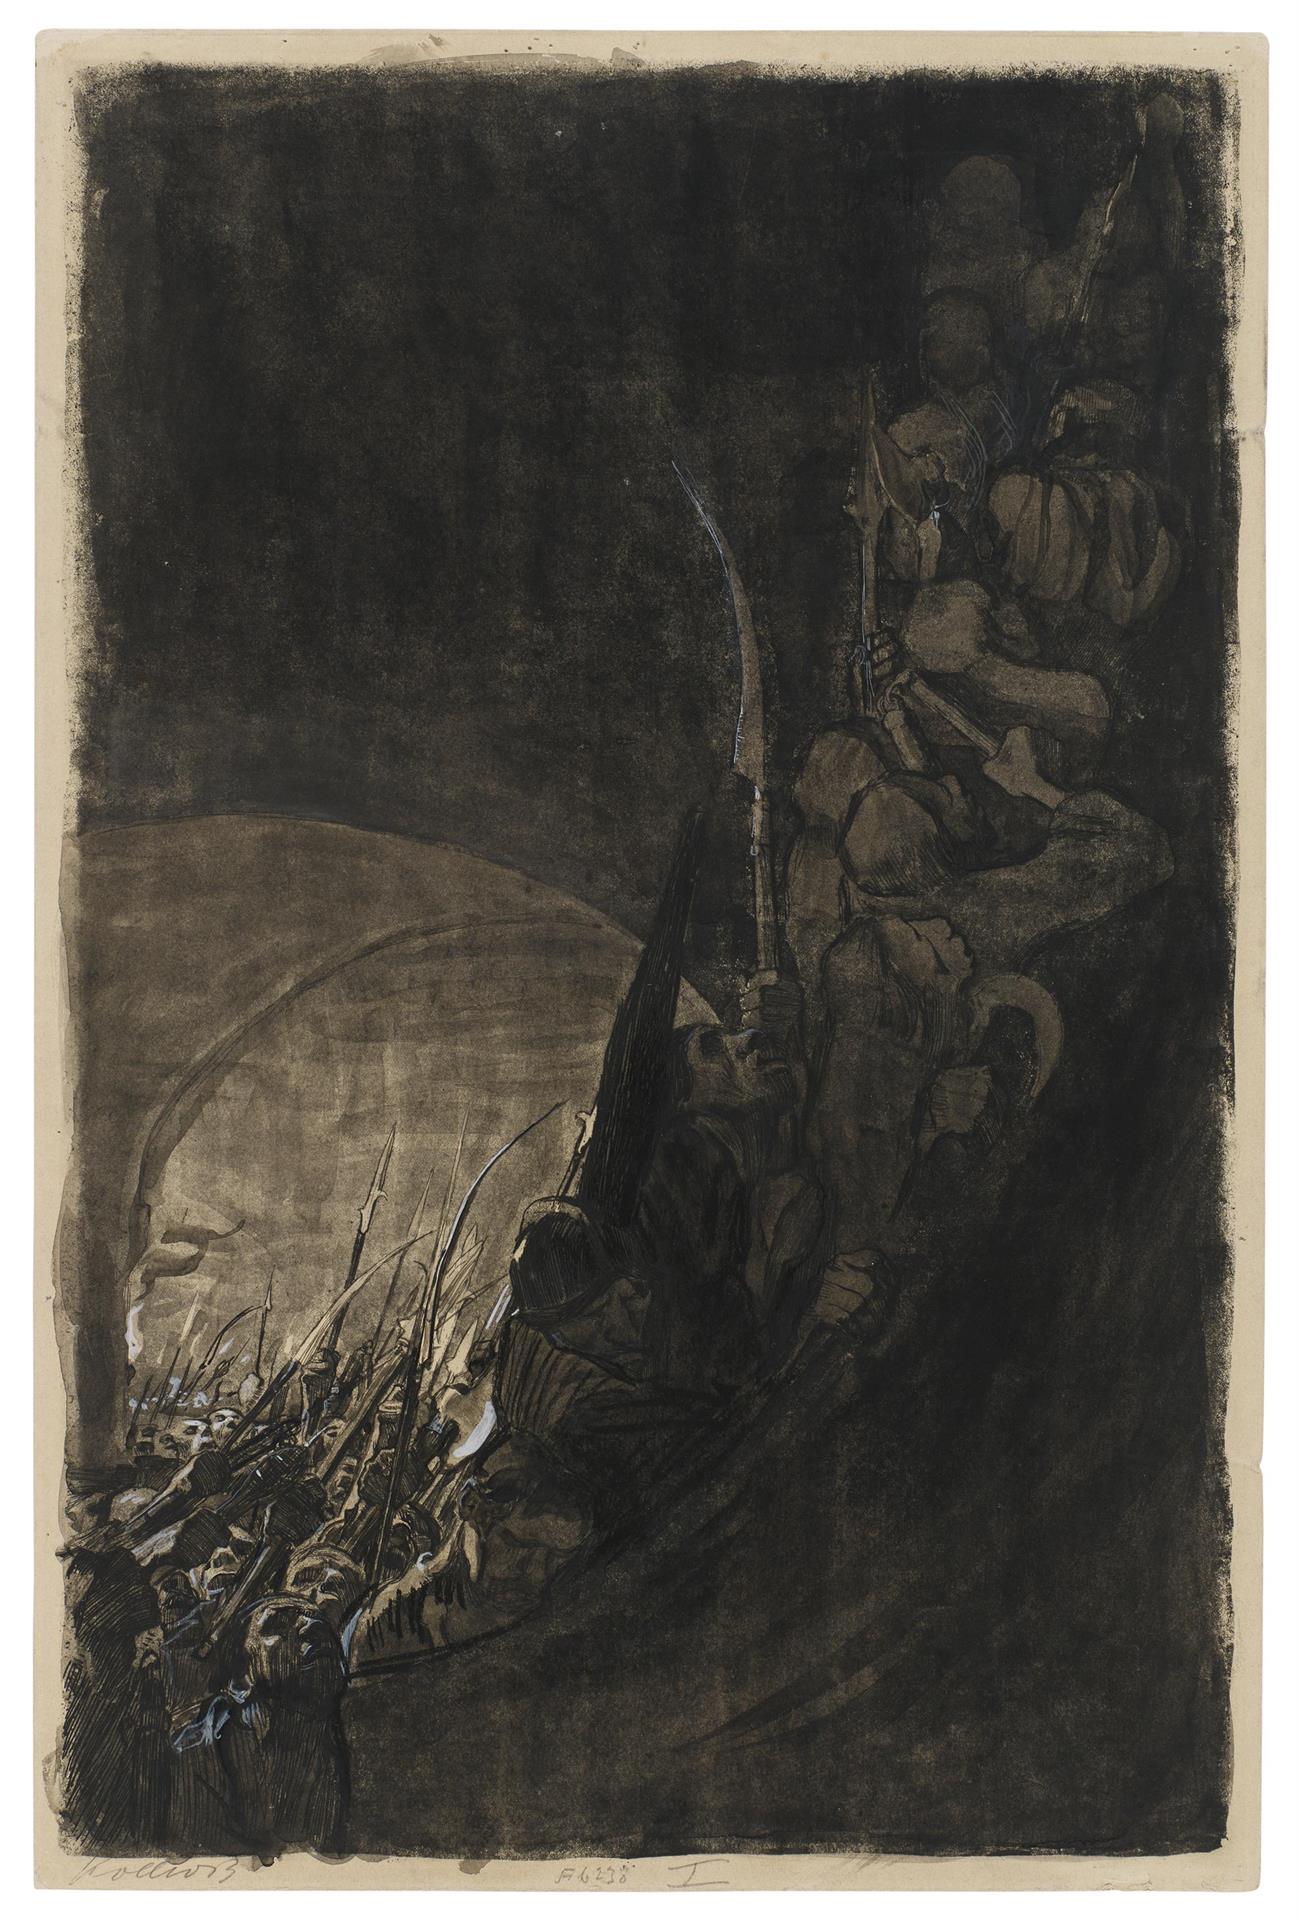 Käthe Kollwitz, Arming in a Vault, first proof of sheet 4 for the »Peasants War« cycle, 1906, bicolour etching, line etching, drypoint, aquatint and soft ground with imprint of Ziegler's transfer paper, edited by hand in black ink and Titanium white, Kn 96 I, Cologne Kollwitz Collection © Käthe Kollwitz Museum Köln